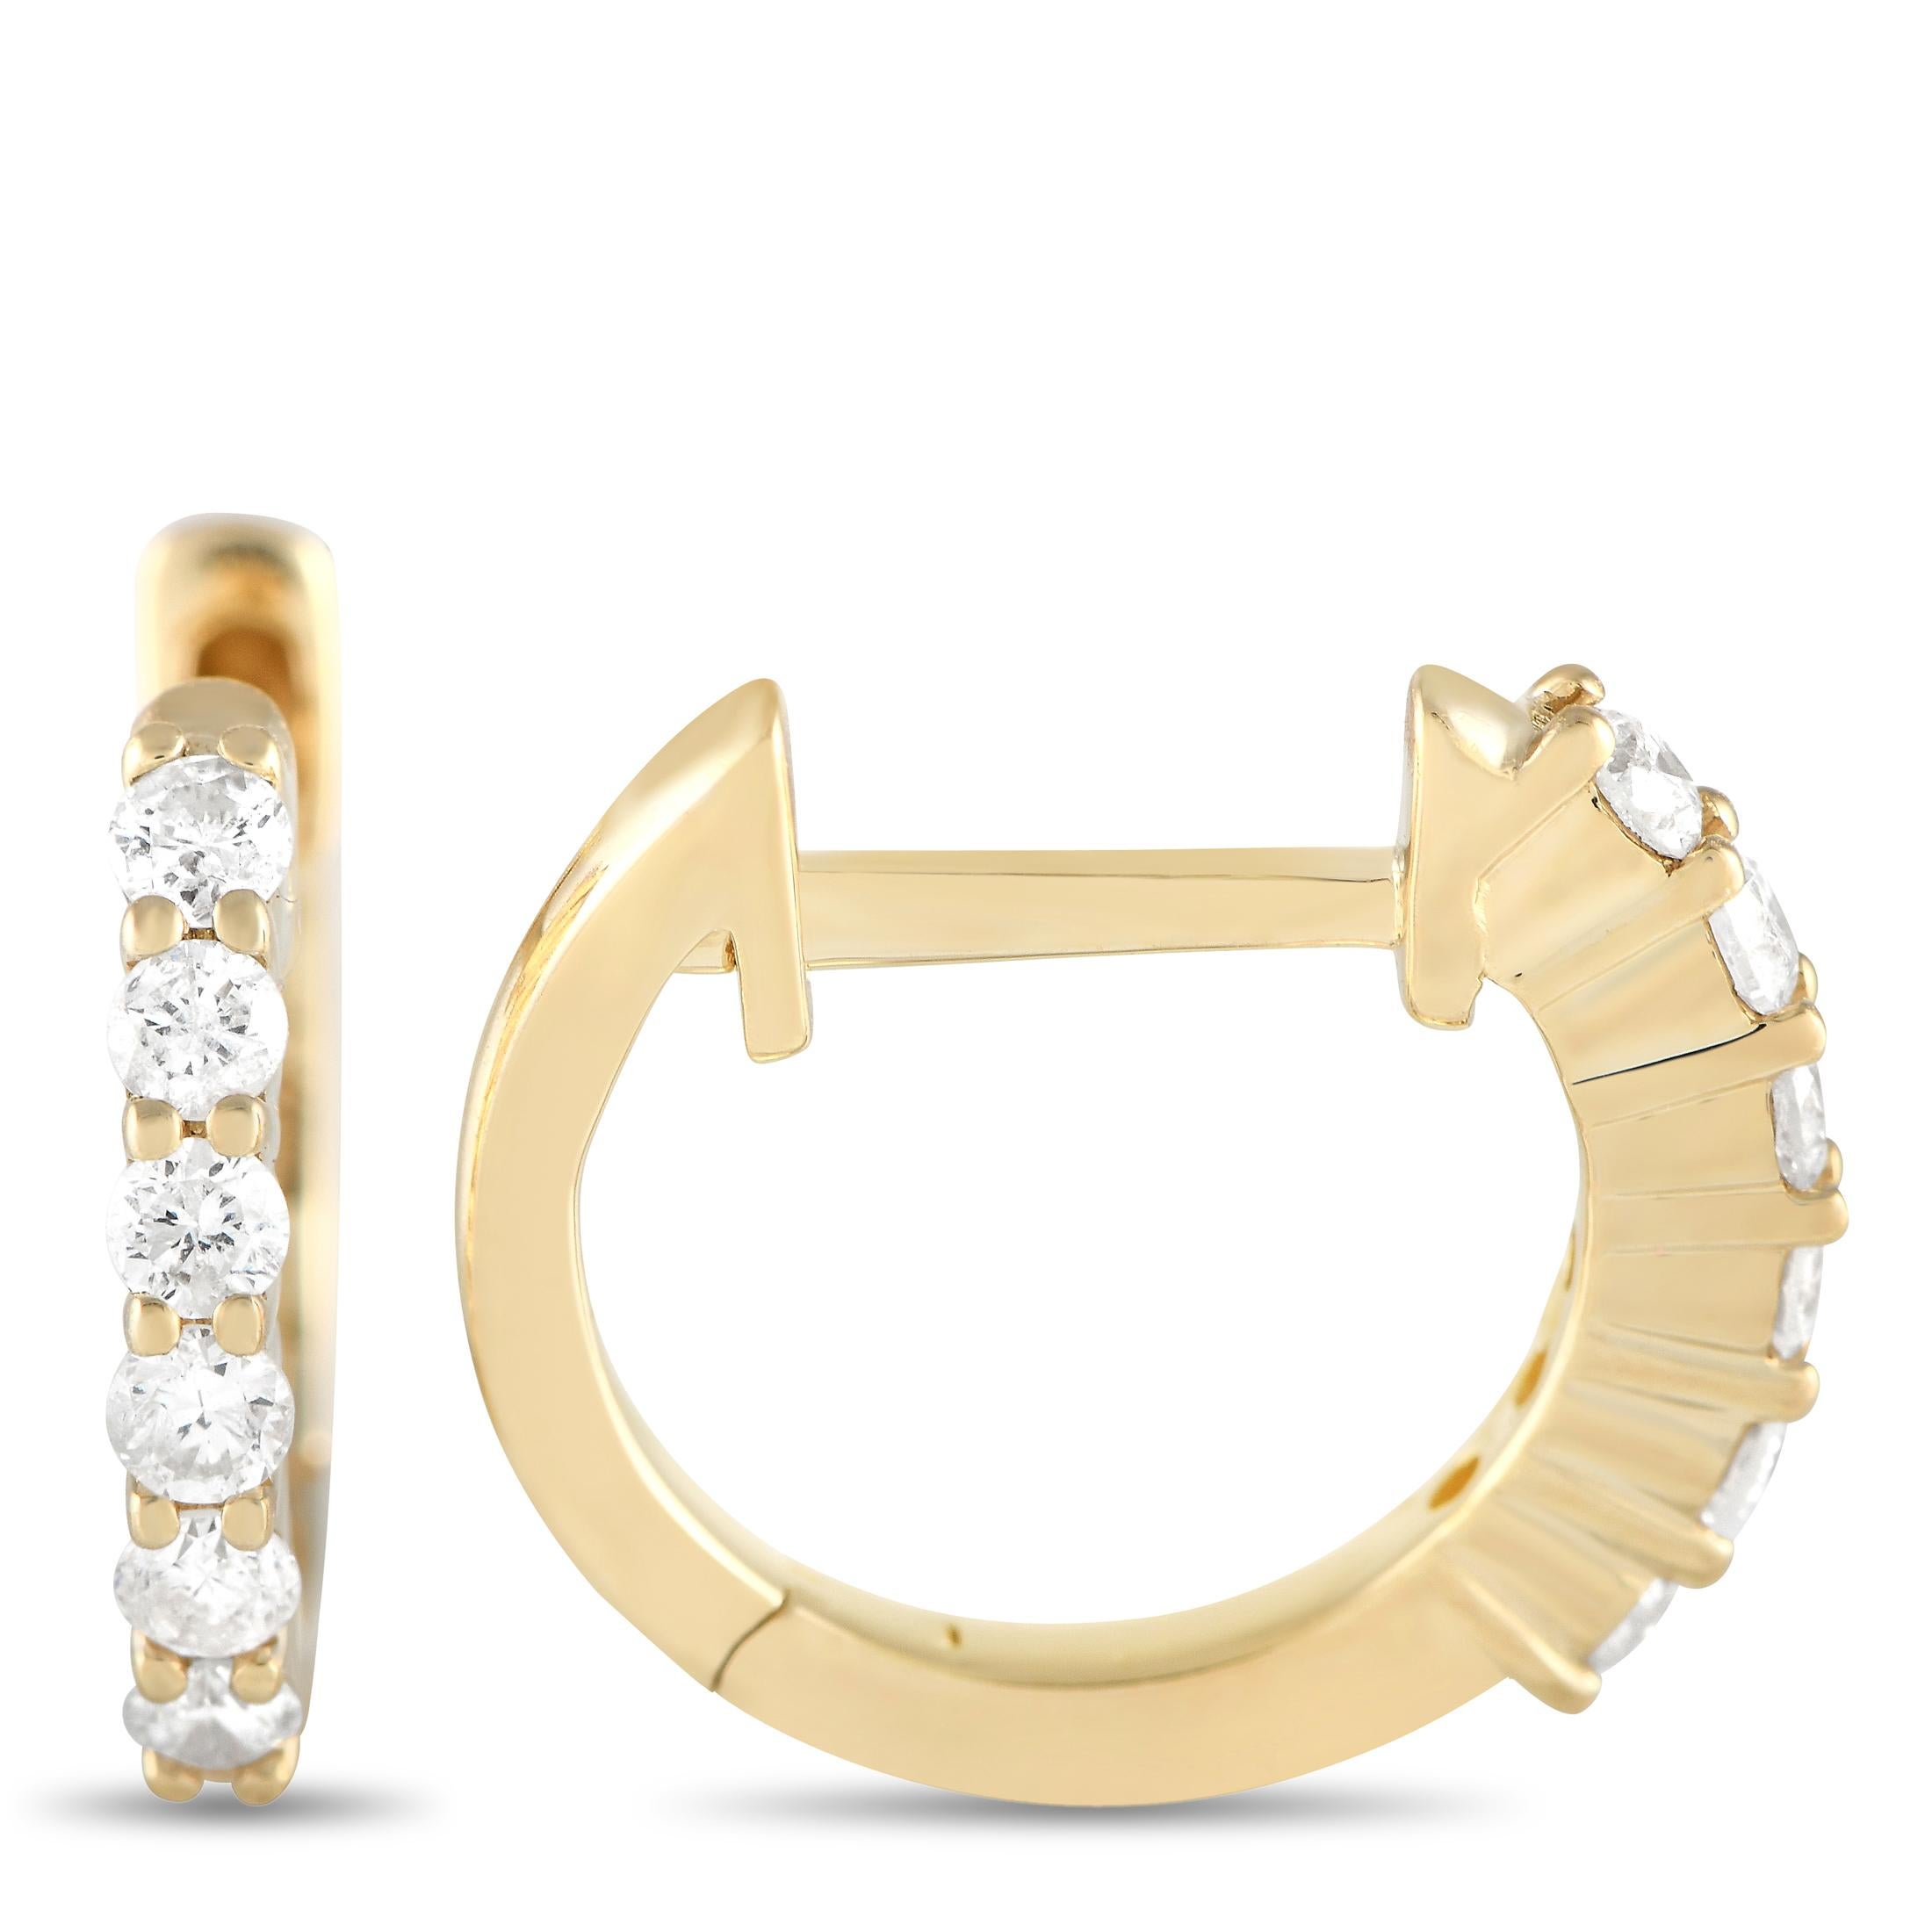 Sparkling round-cut diamonds totaling 0.25 carats make these elegant hoop earrings the perfect addition to any outfit. Simple, elegant, and incredibly chic, each one features a classic 14K Yellow Gold setting that measures 0.50” round. 

This